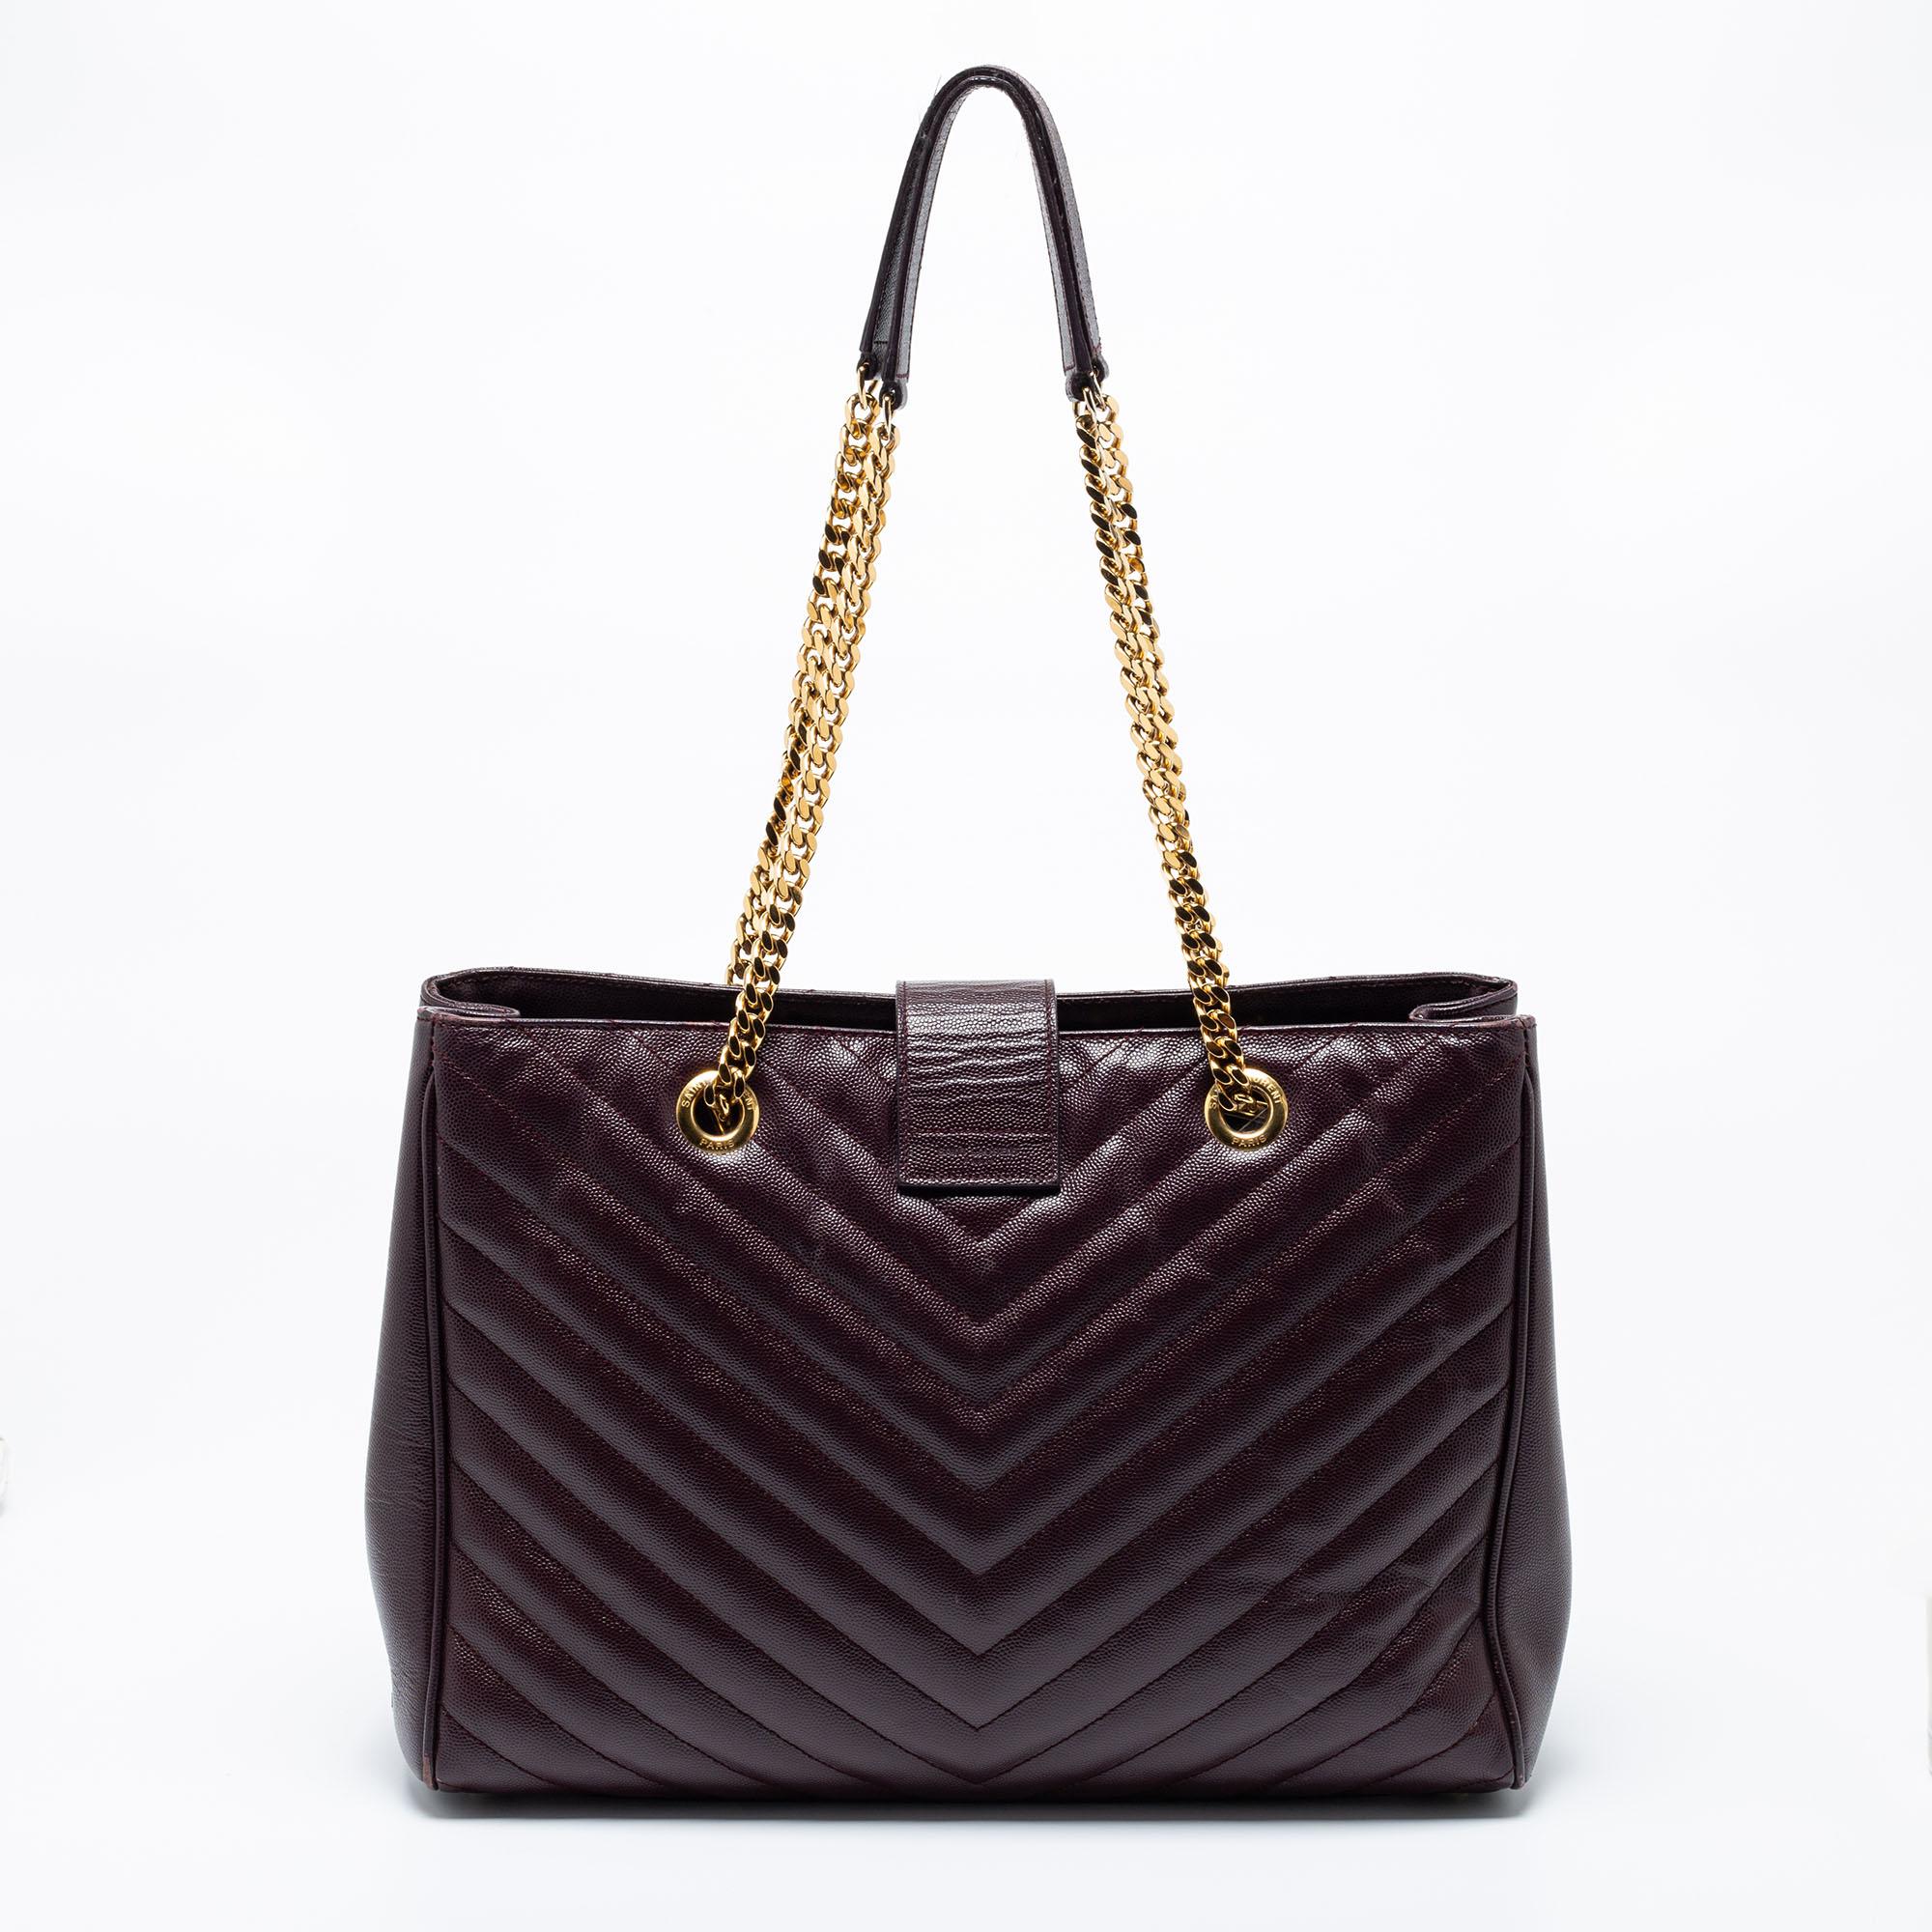 This mesmerizing burgundy tote from Saint Laurent has been meticulously crafted from leather in a chevron-quilted pattern and is designed with gold-tone hardware and a YSL logo detail on the front flap. The sensuous bag opens to a fabric-lined